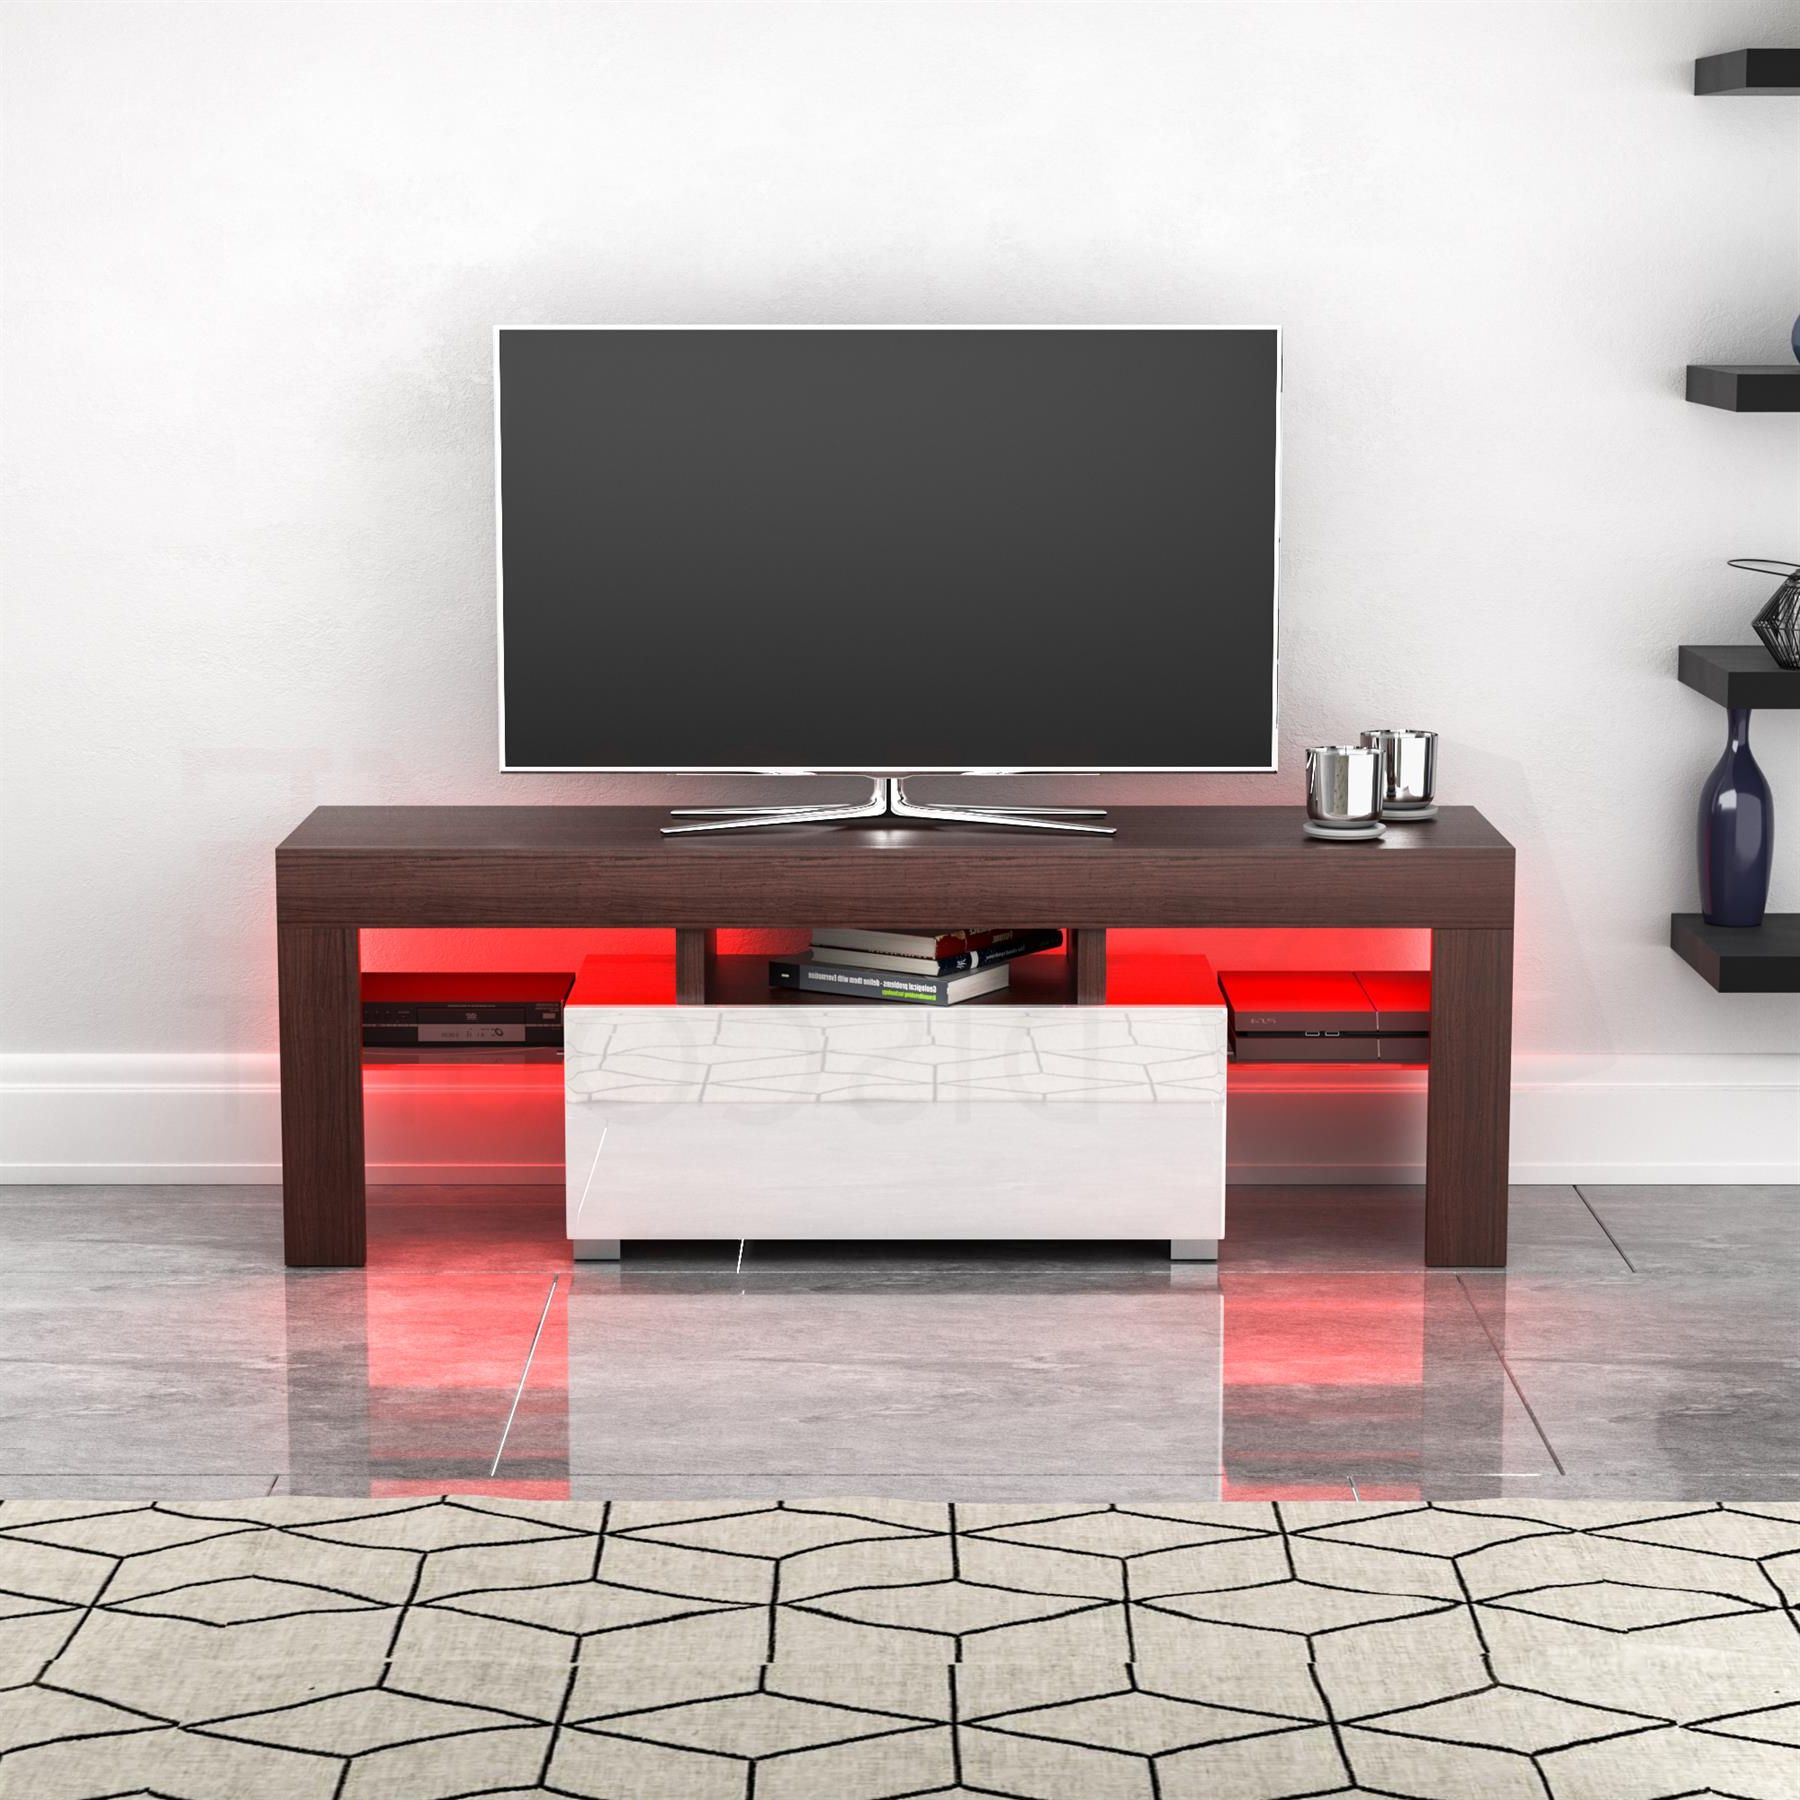 Luna Led Tv Stand Cabinet Unit 1 Drawer Modern Inside Zimtown Modern Tv Stands High Gloss Media Console Cabinet With Led Shelf And Drawers (Gallery 2 of 20)